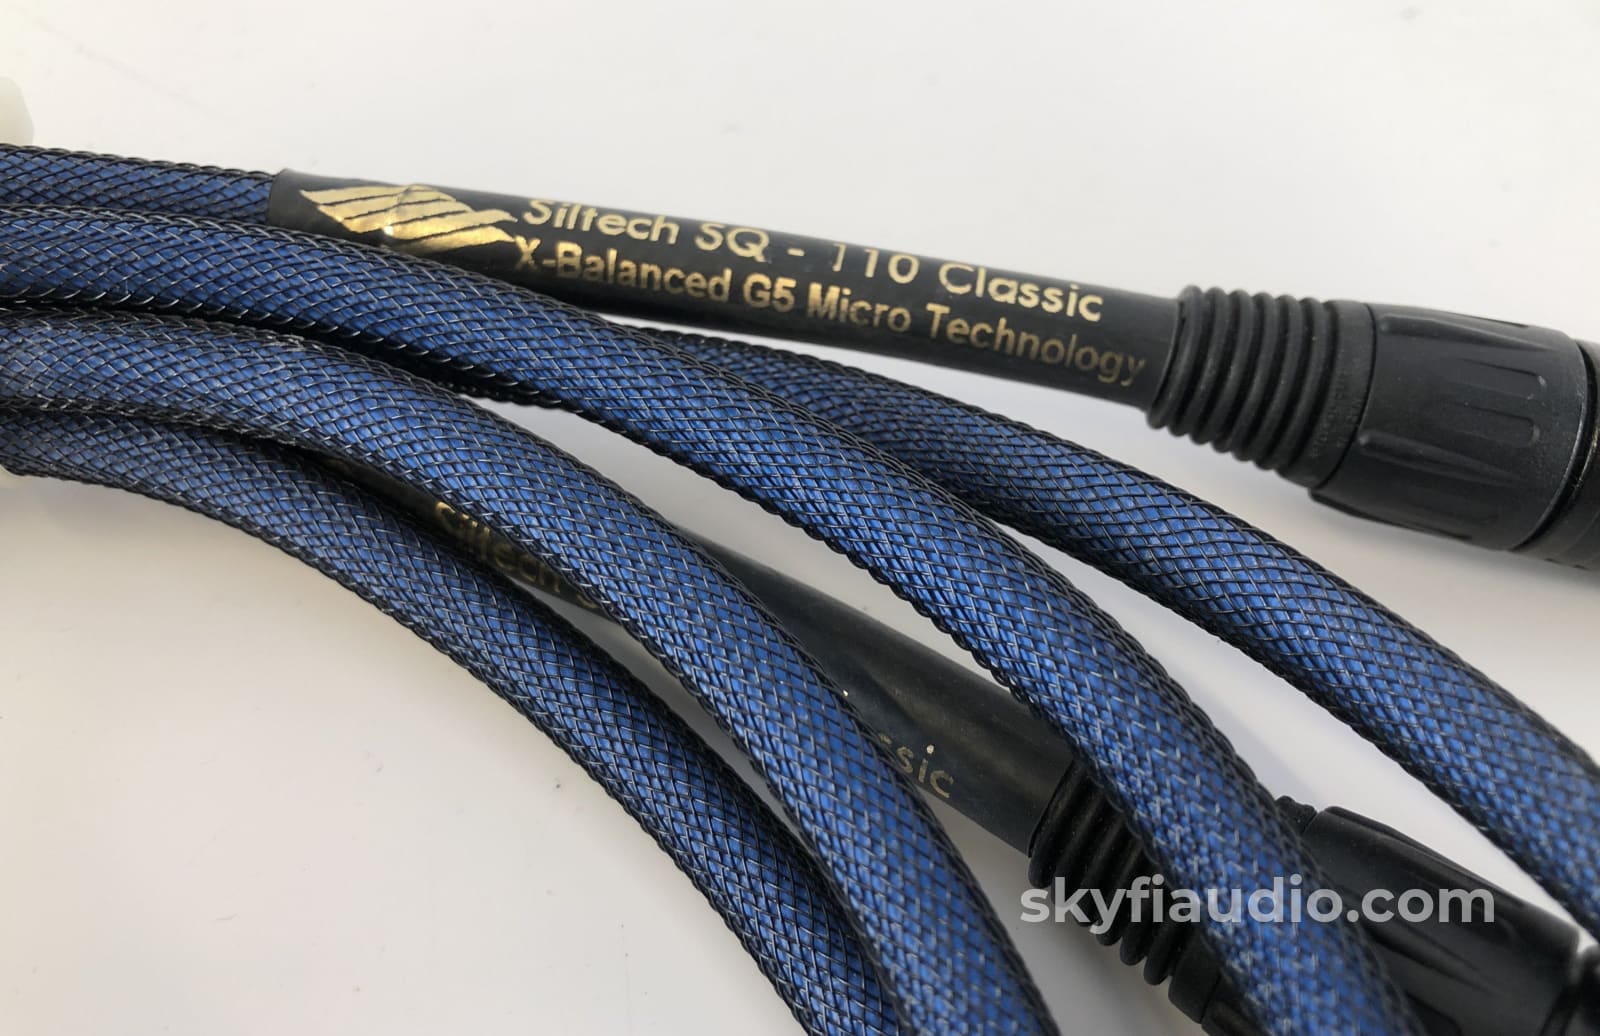 Siltech Cables - Sq-110 Classic Xlr Interconnects With X-Balanced G5 Micro Technology 5